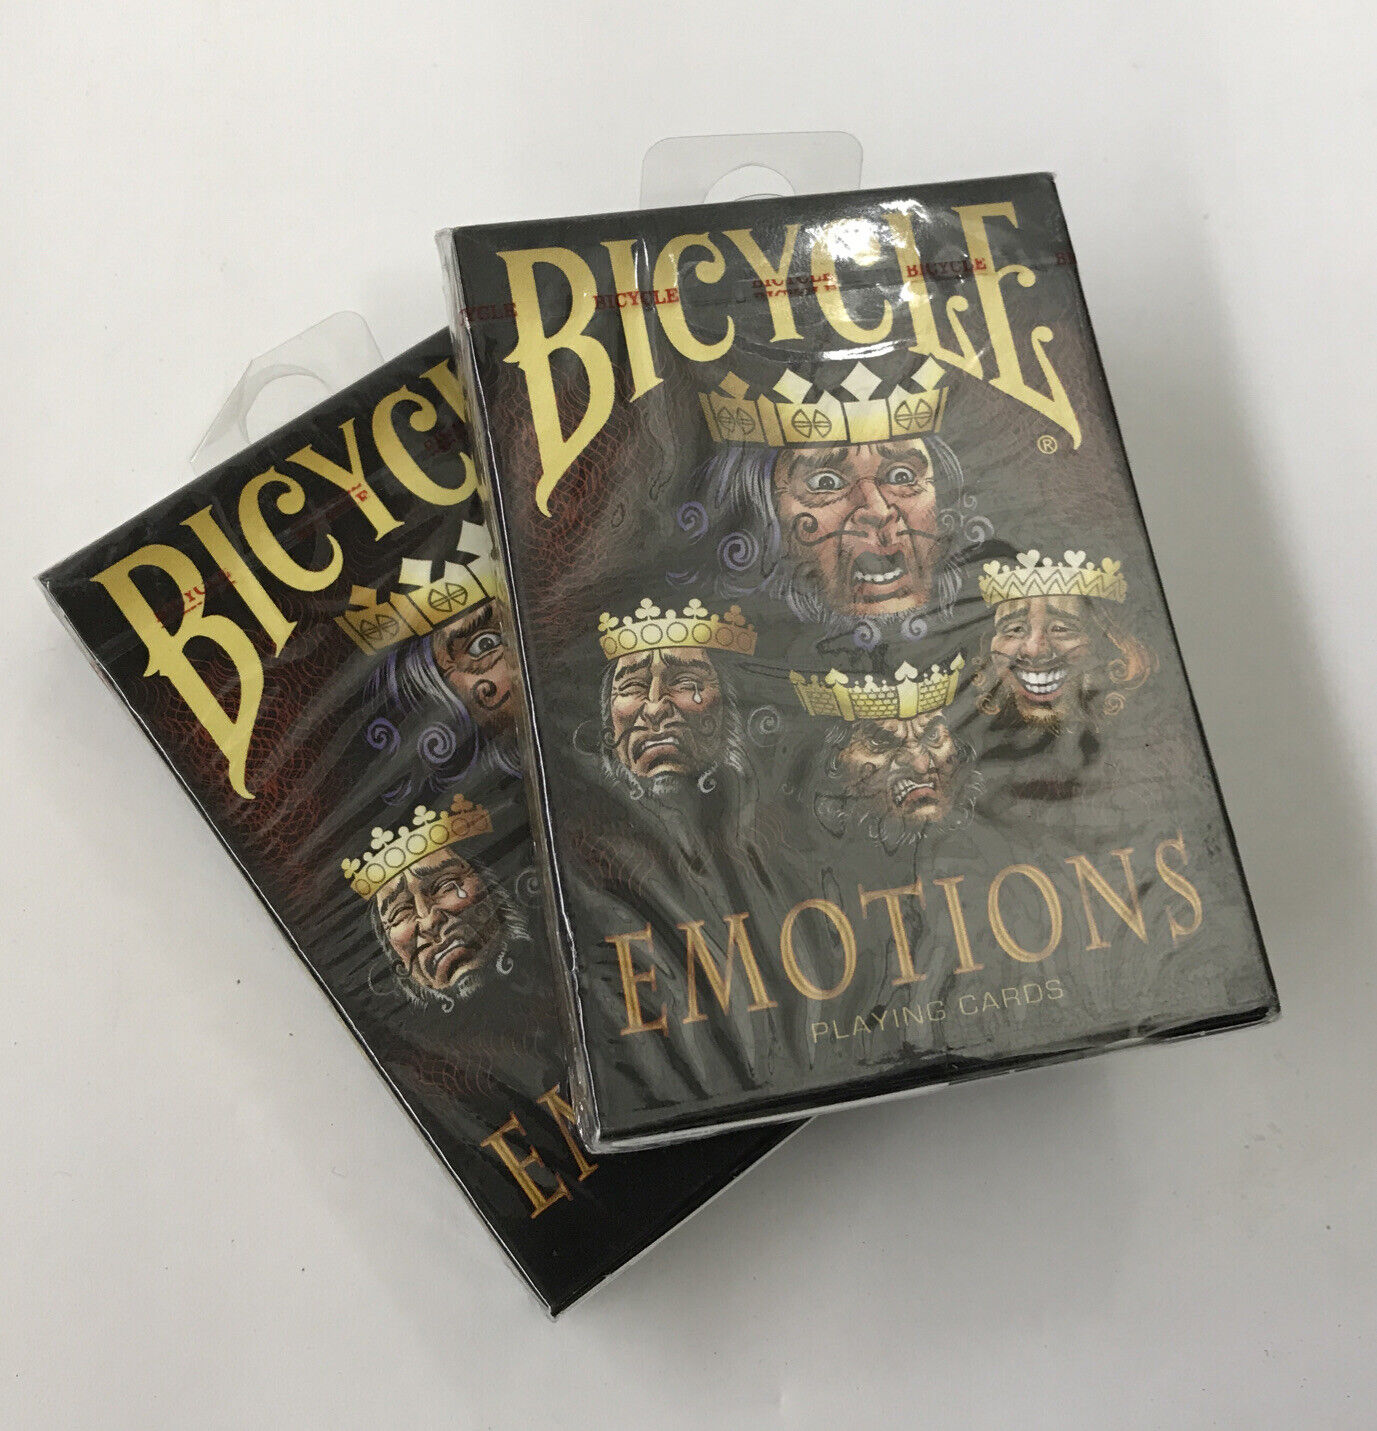 BICYCLE “EMOTIONS” Playing Cards NIP Poker Deck Size Lot Of 2 Decks